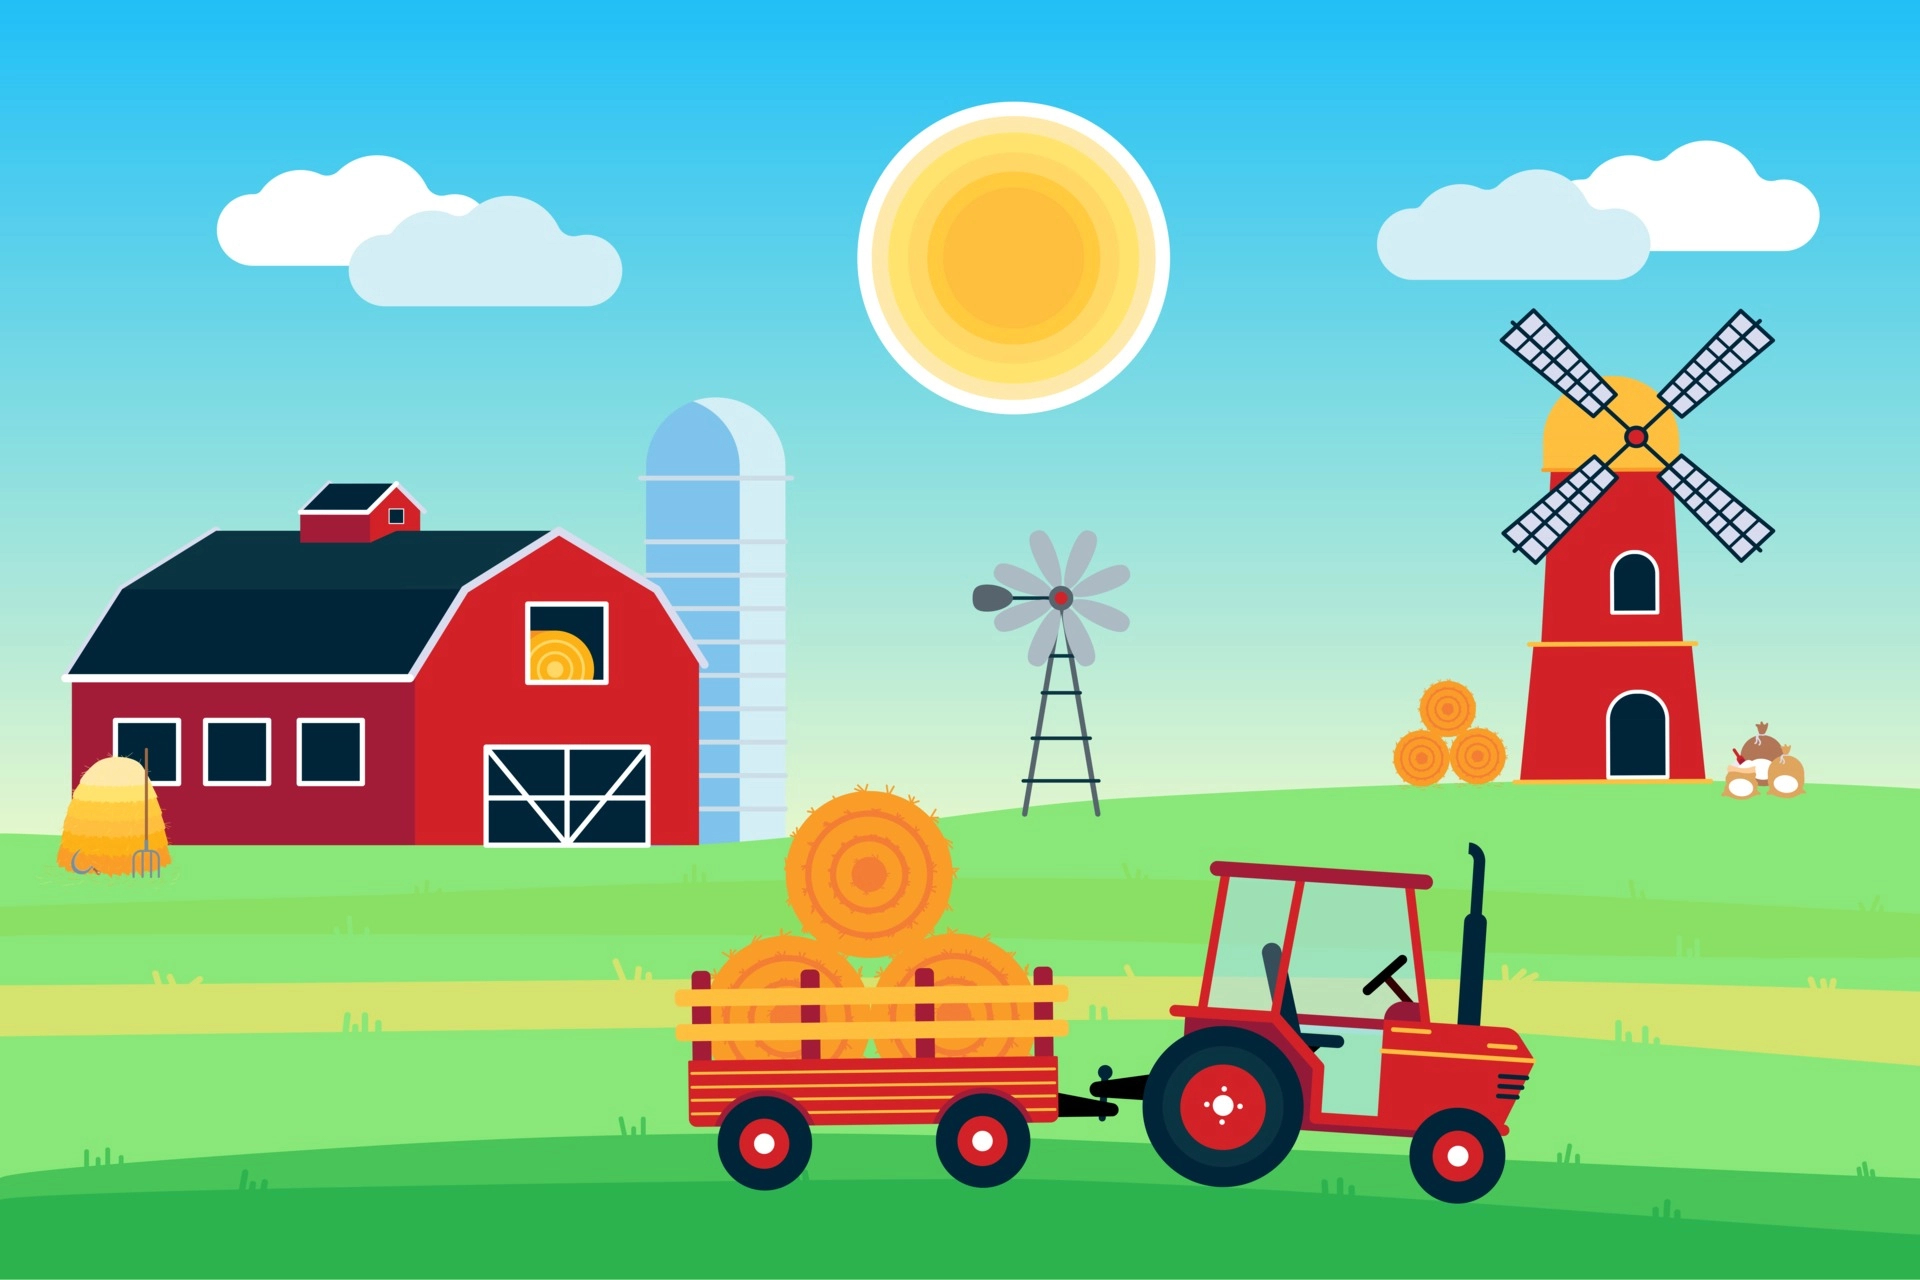 1920x1280 Village harvesting landscape poster, banner or wallpaper. The tractor with semi-trailer and hay bale, red barn with silo, windmill and mill with flour producing flat style design vector illustration. 2808367 Vector Art at Vecteezy